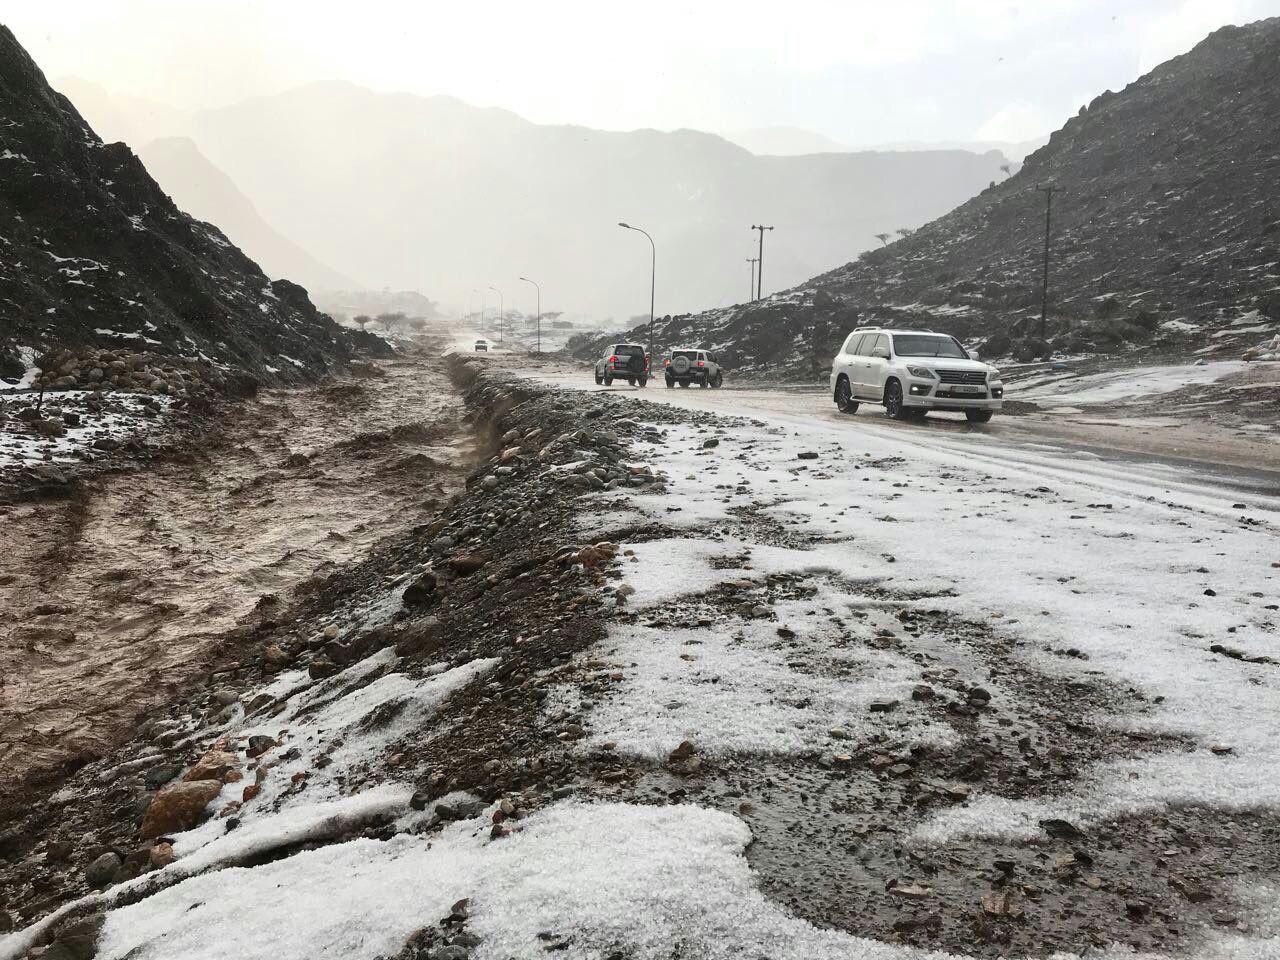 In pictures: Roads covered in ice after hailstorm in Oman